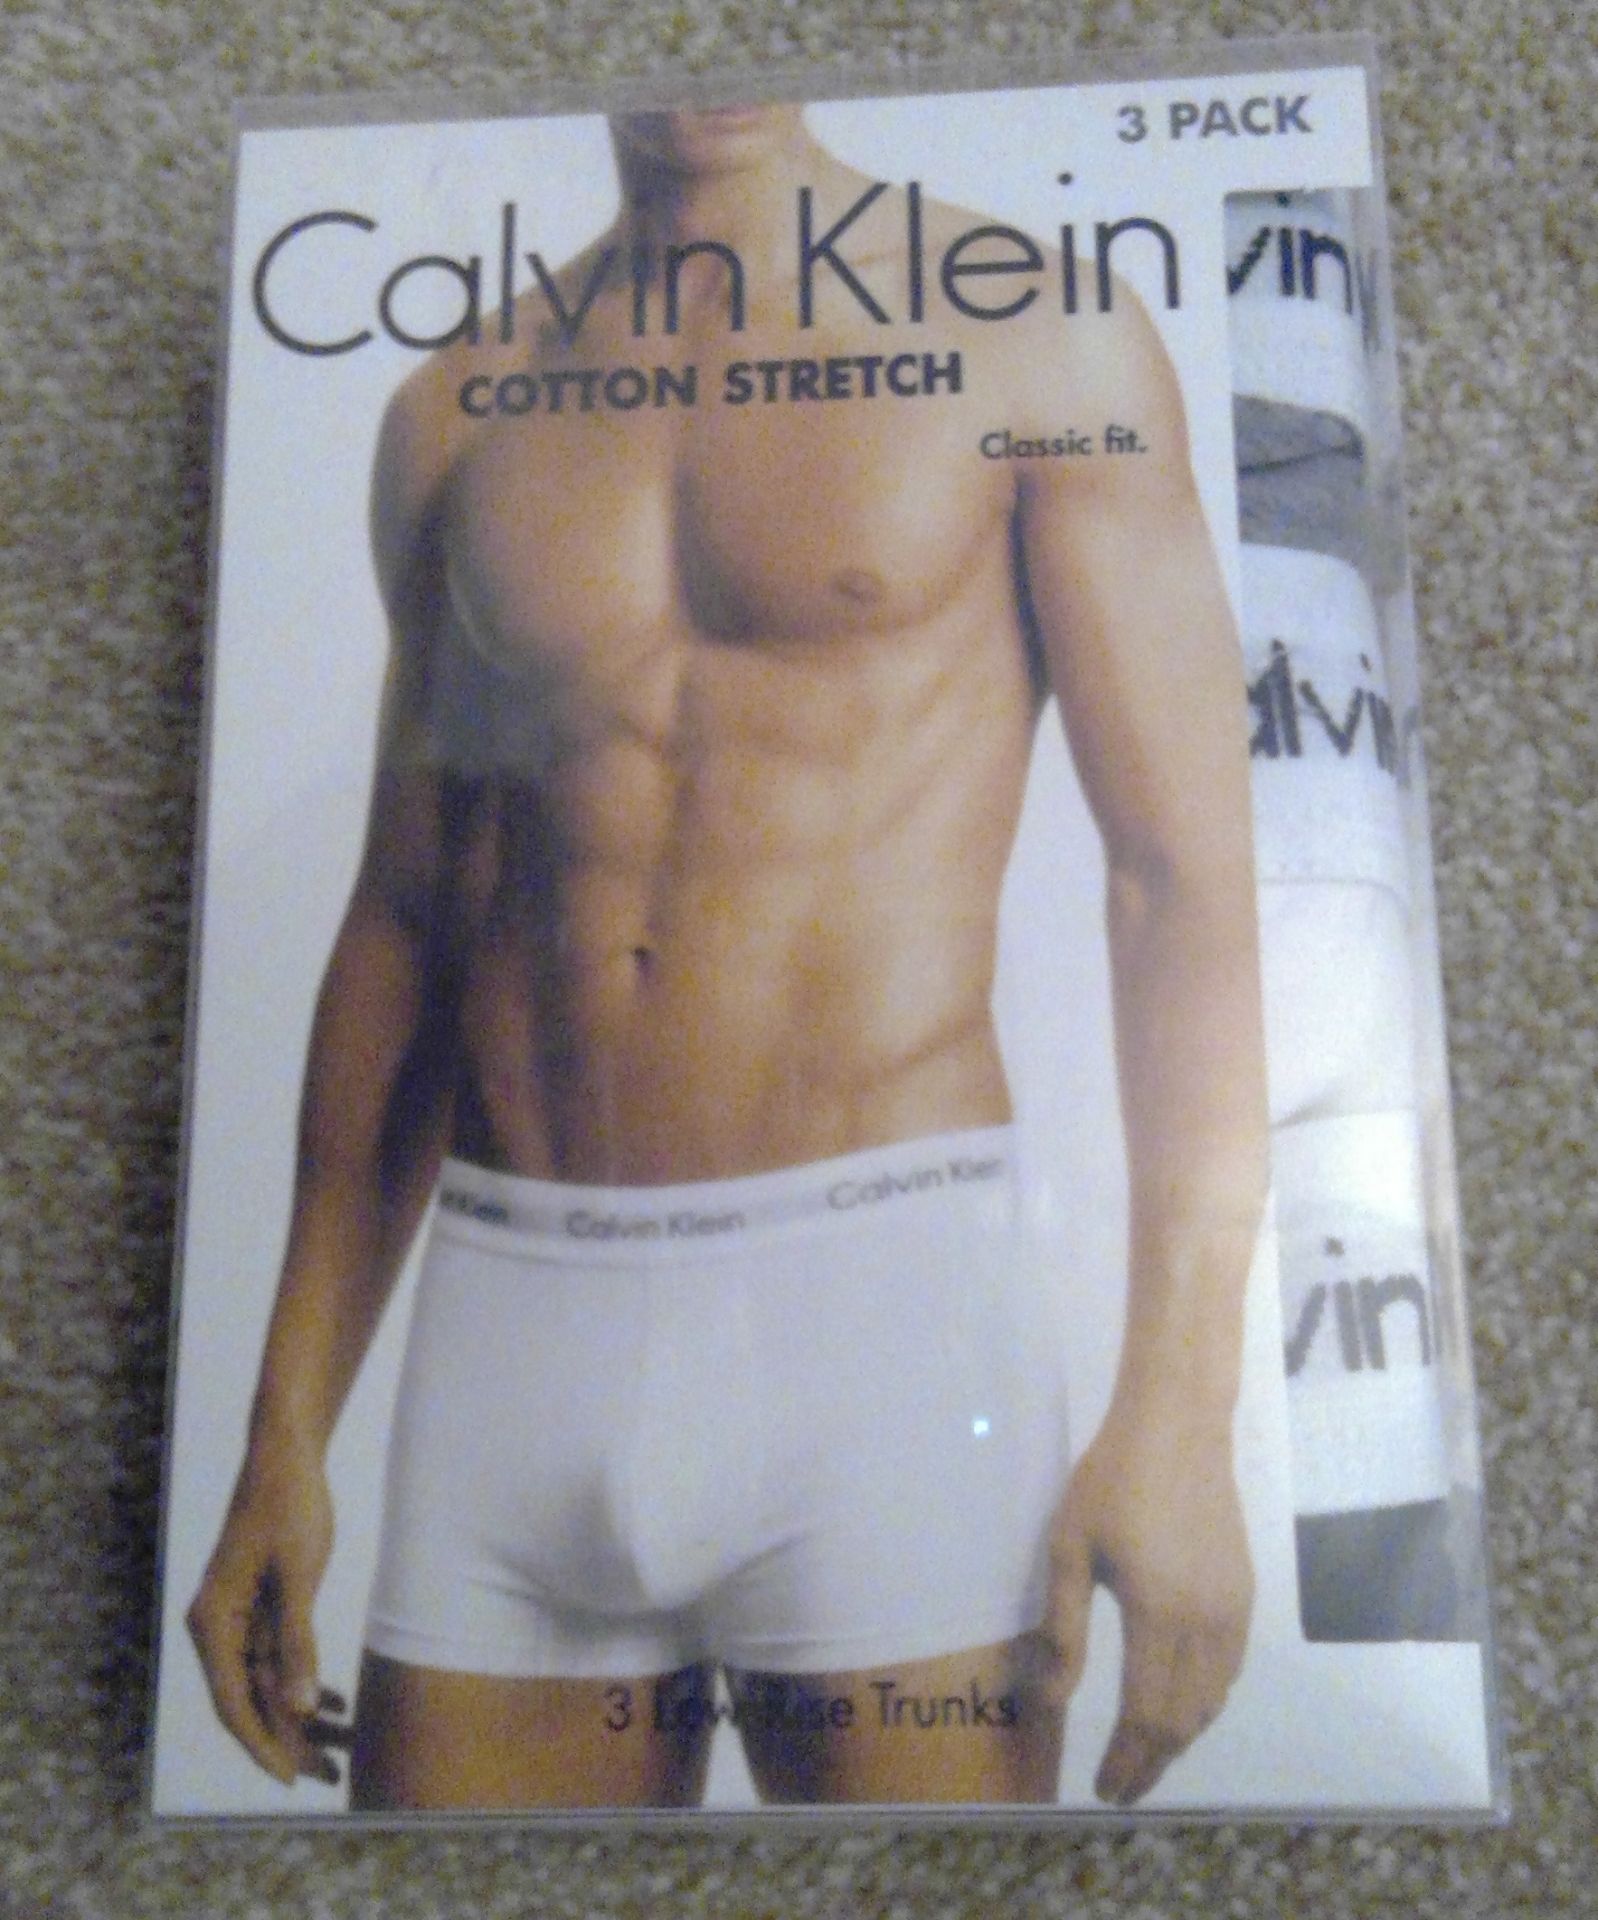 Brand New 3 Pack Calvin Klein Boxer Shorts. Size Small. Code U2664G. Colour Code 998 (White, grey,